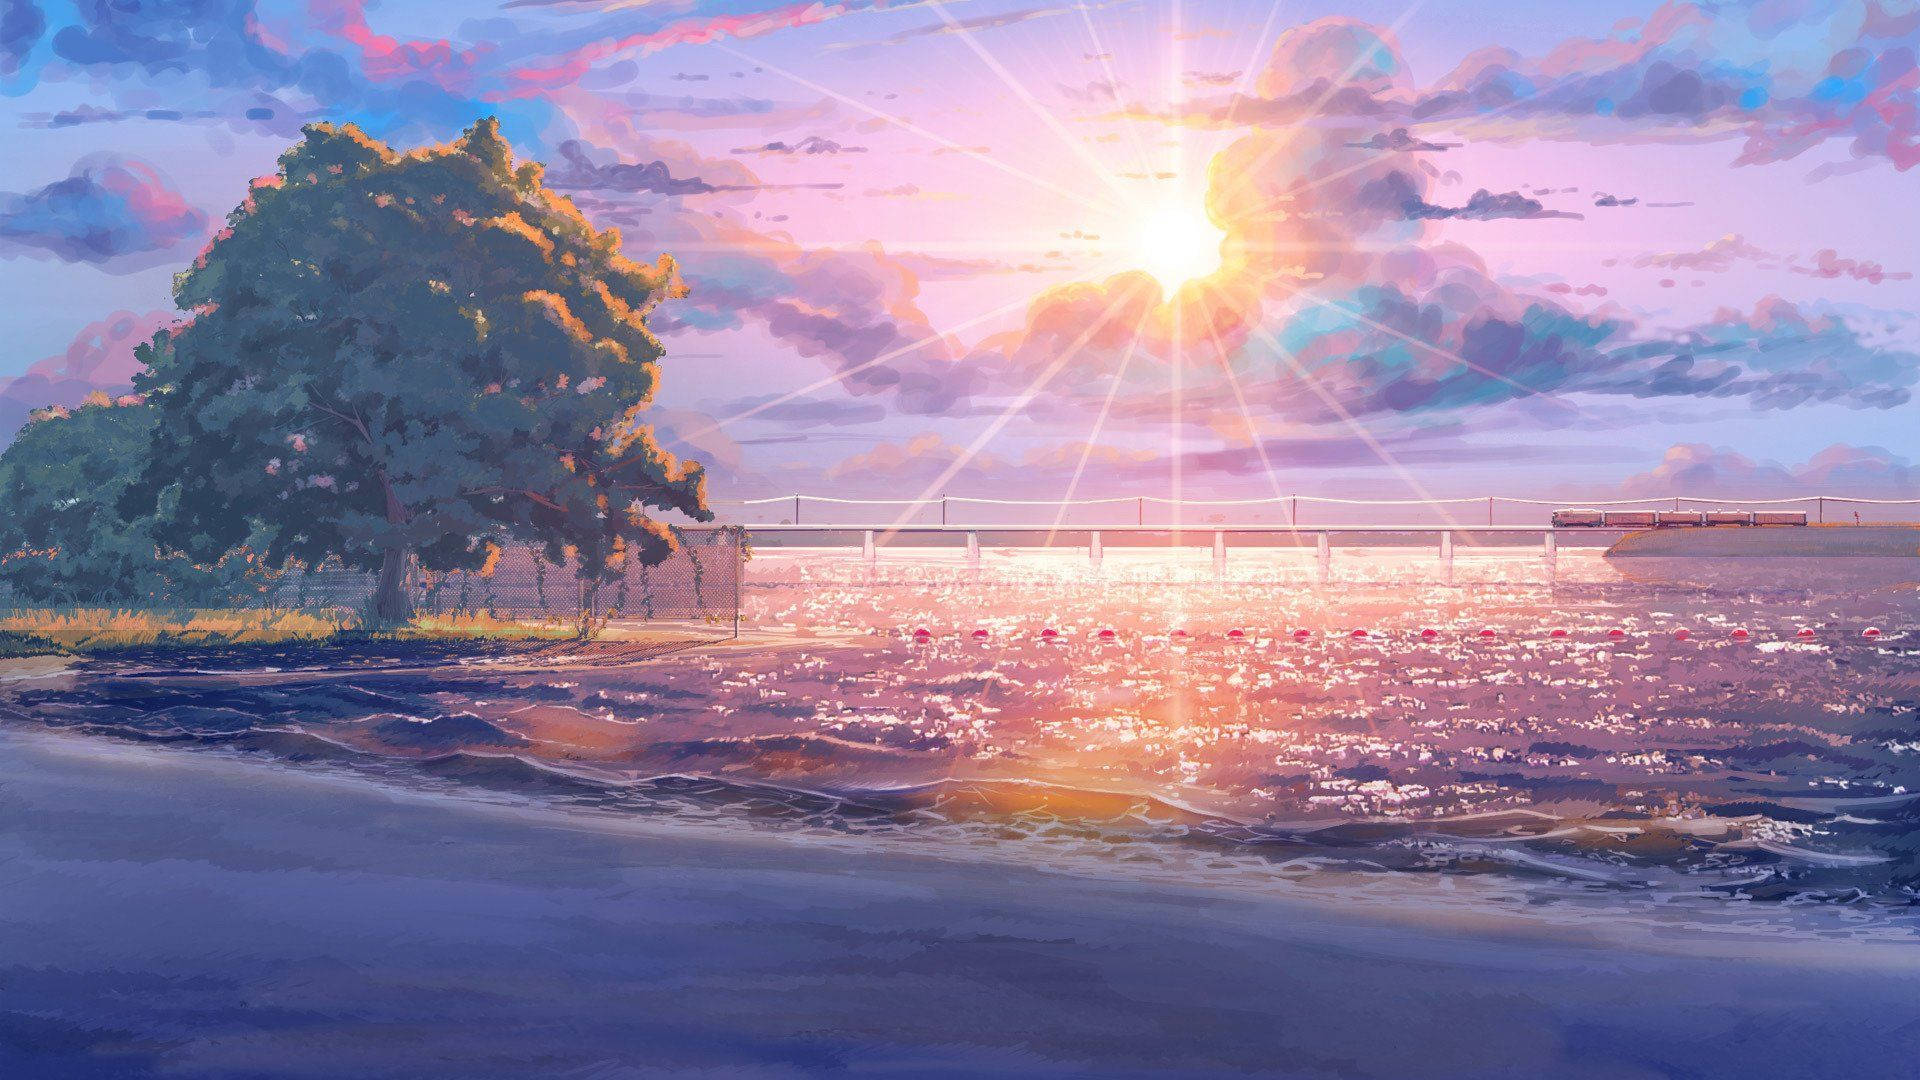 Caption: Majestic Anime Scenery Canvas Painting Wallpaper